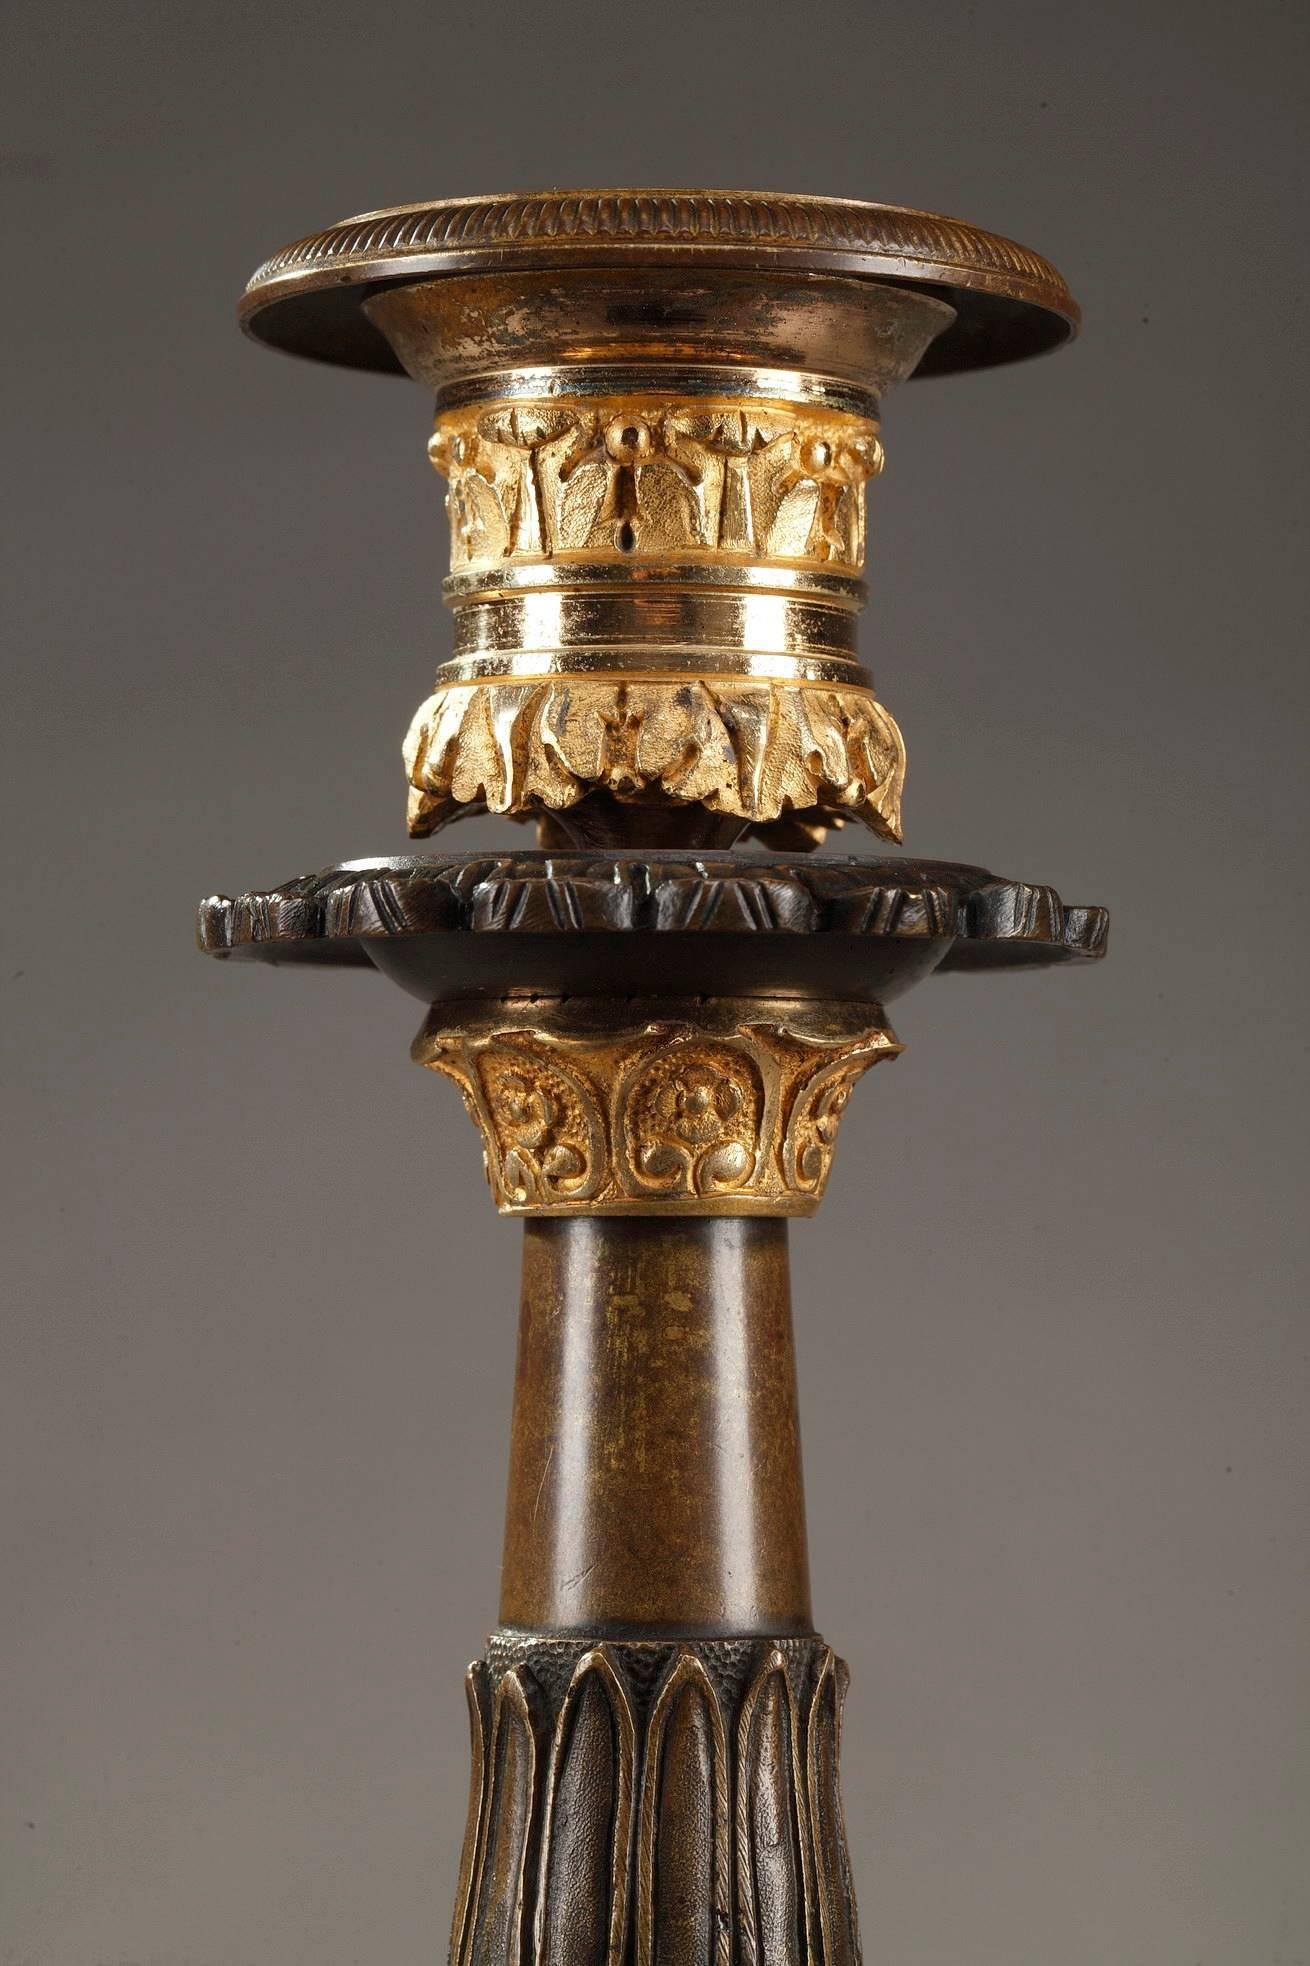 Pair of Restauration candlesticks crafted of gilt and patinated bronze resting on three foliated claw feet and a tripod base with chamfered angles. Each candlestick is richly decorated with acanthus leaf, palmettes, scrolls, water-leaf and